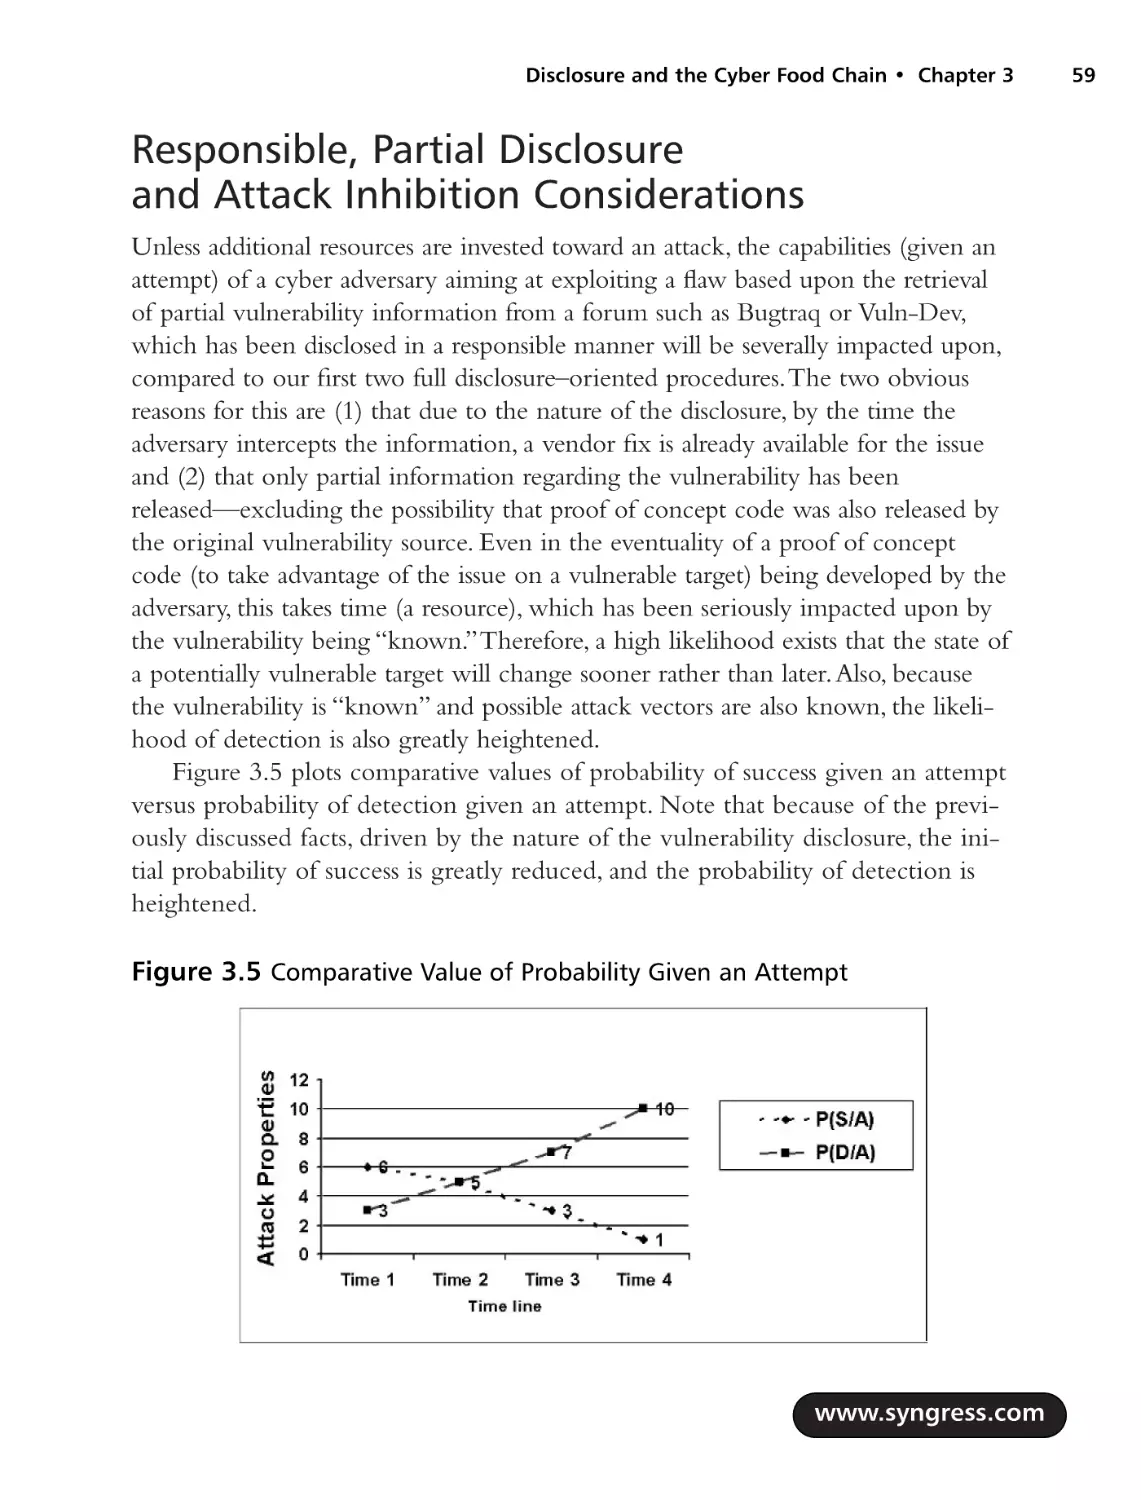 Responsible, Partial Disclosure and Attack Inhibition Considerations